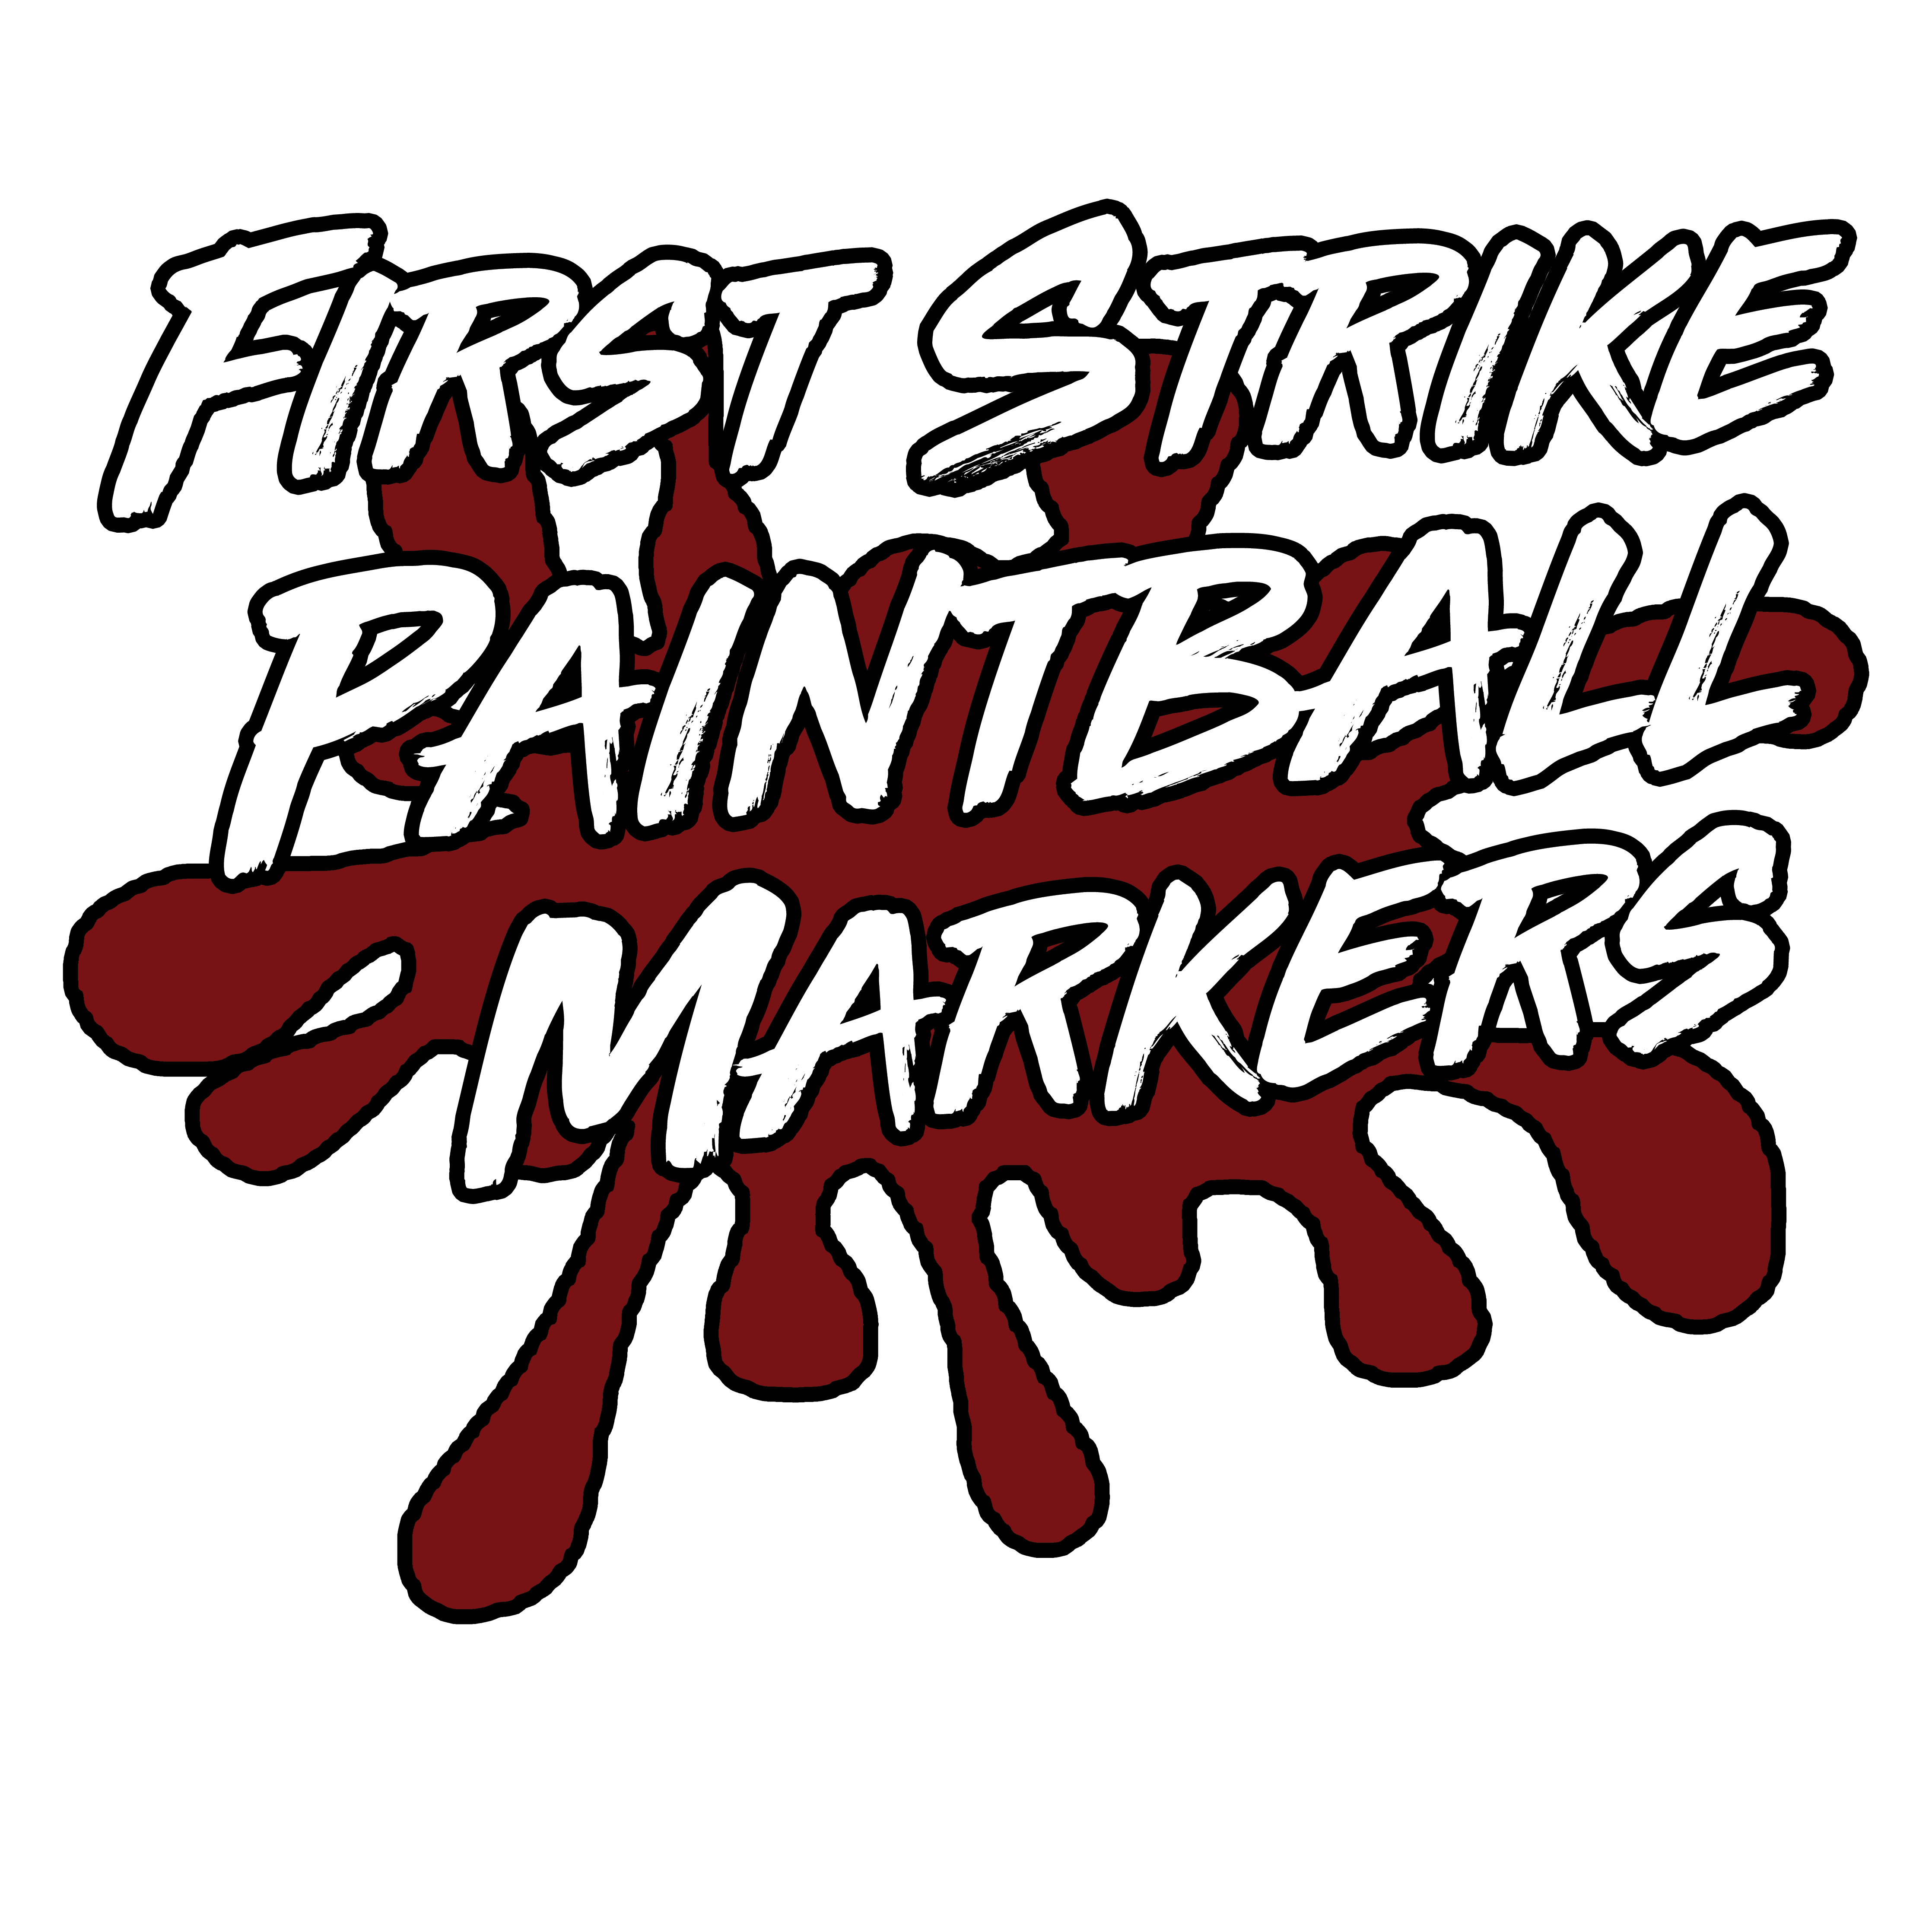 First Strike Markers